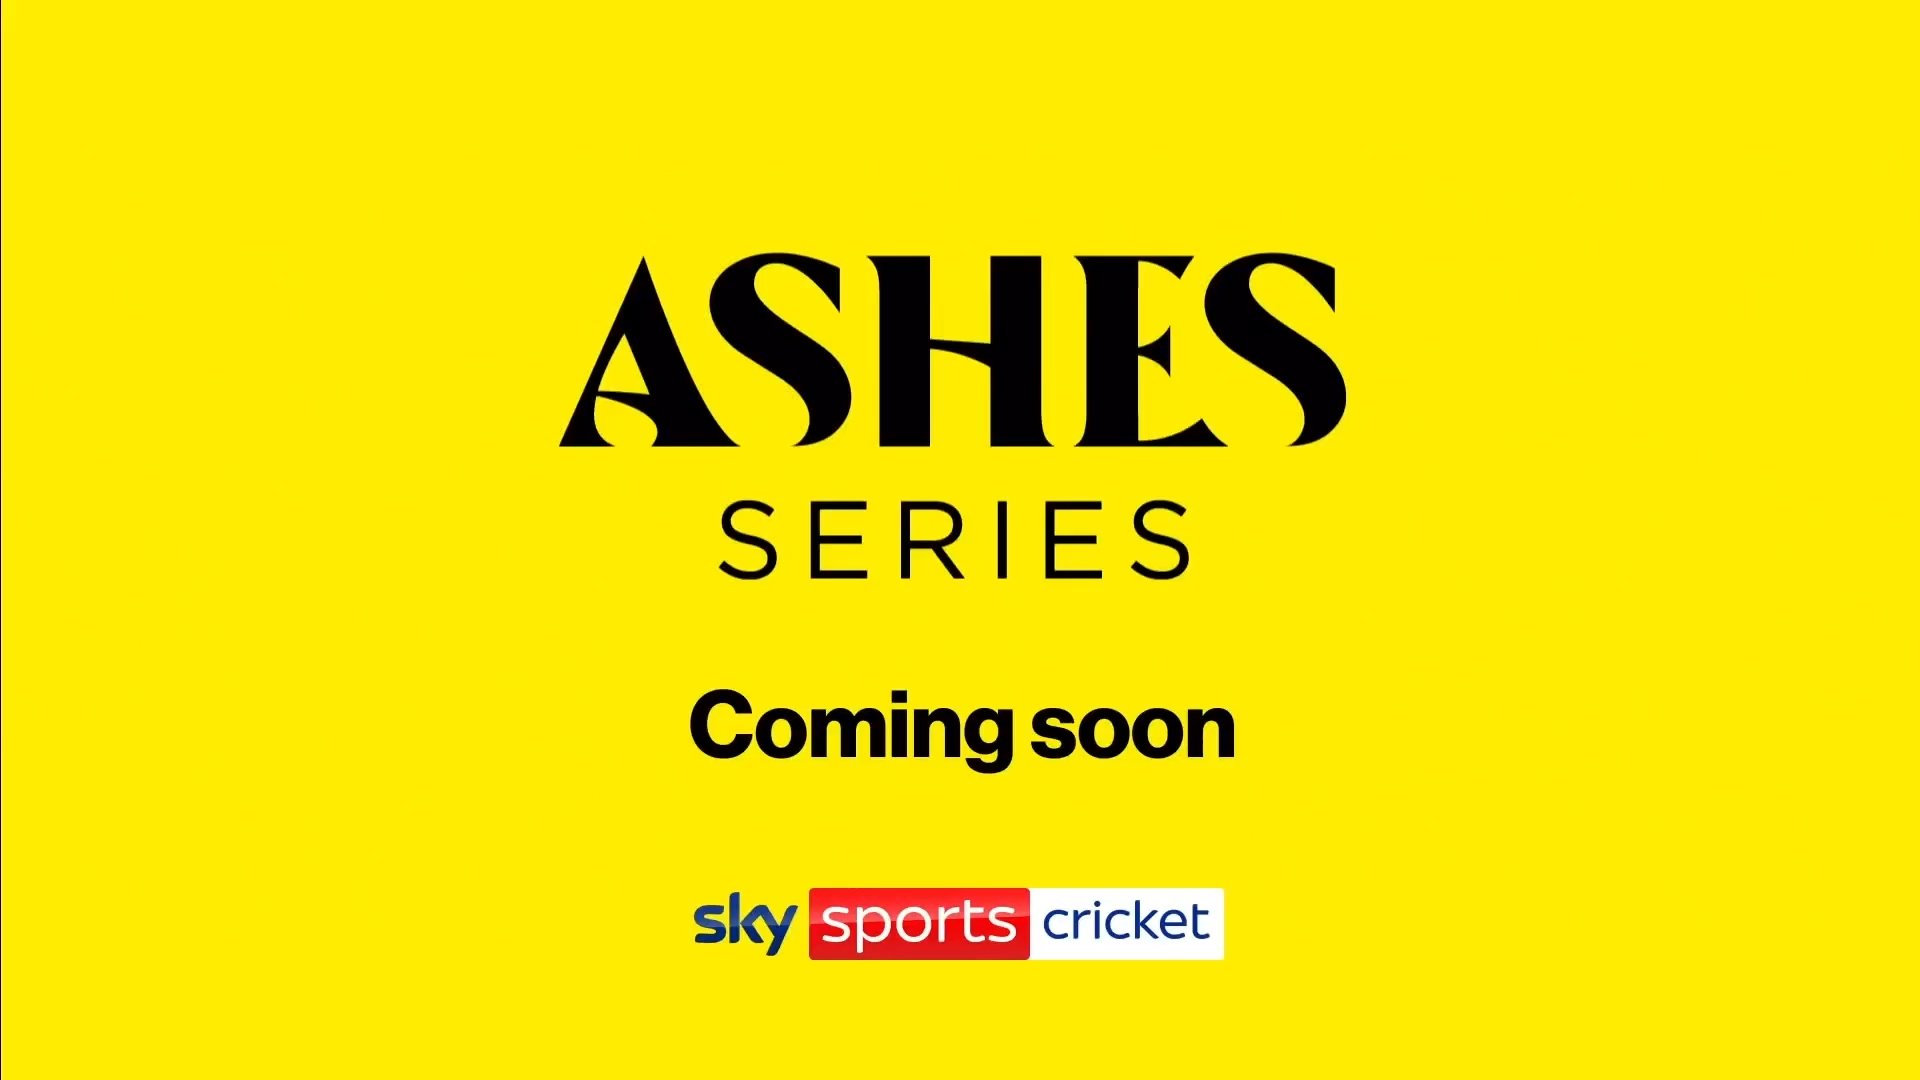 The Ashes on Sky Sports